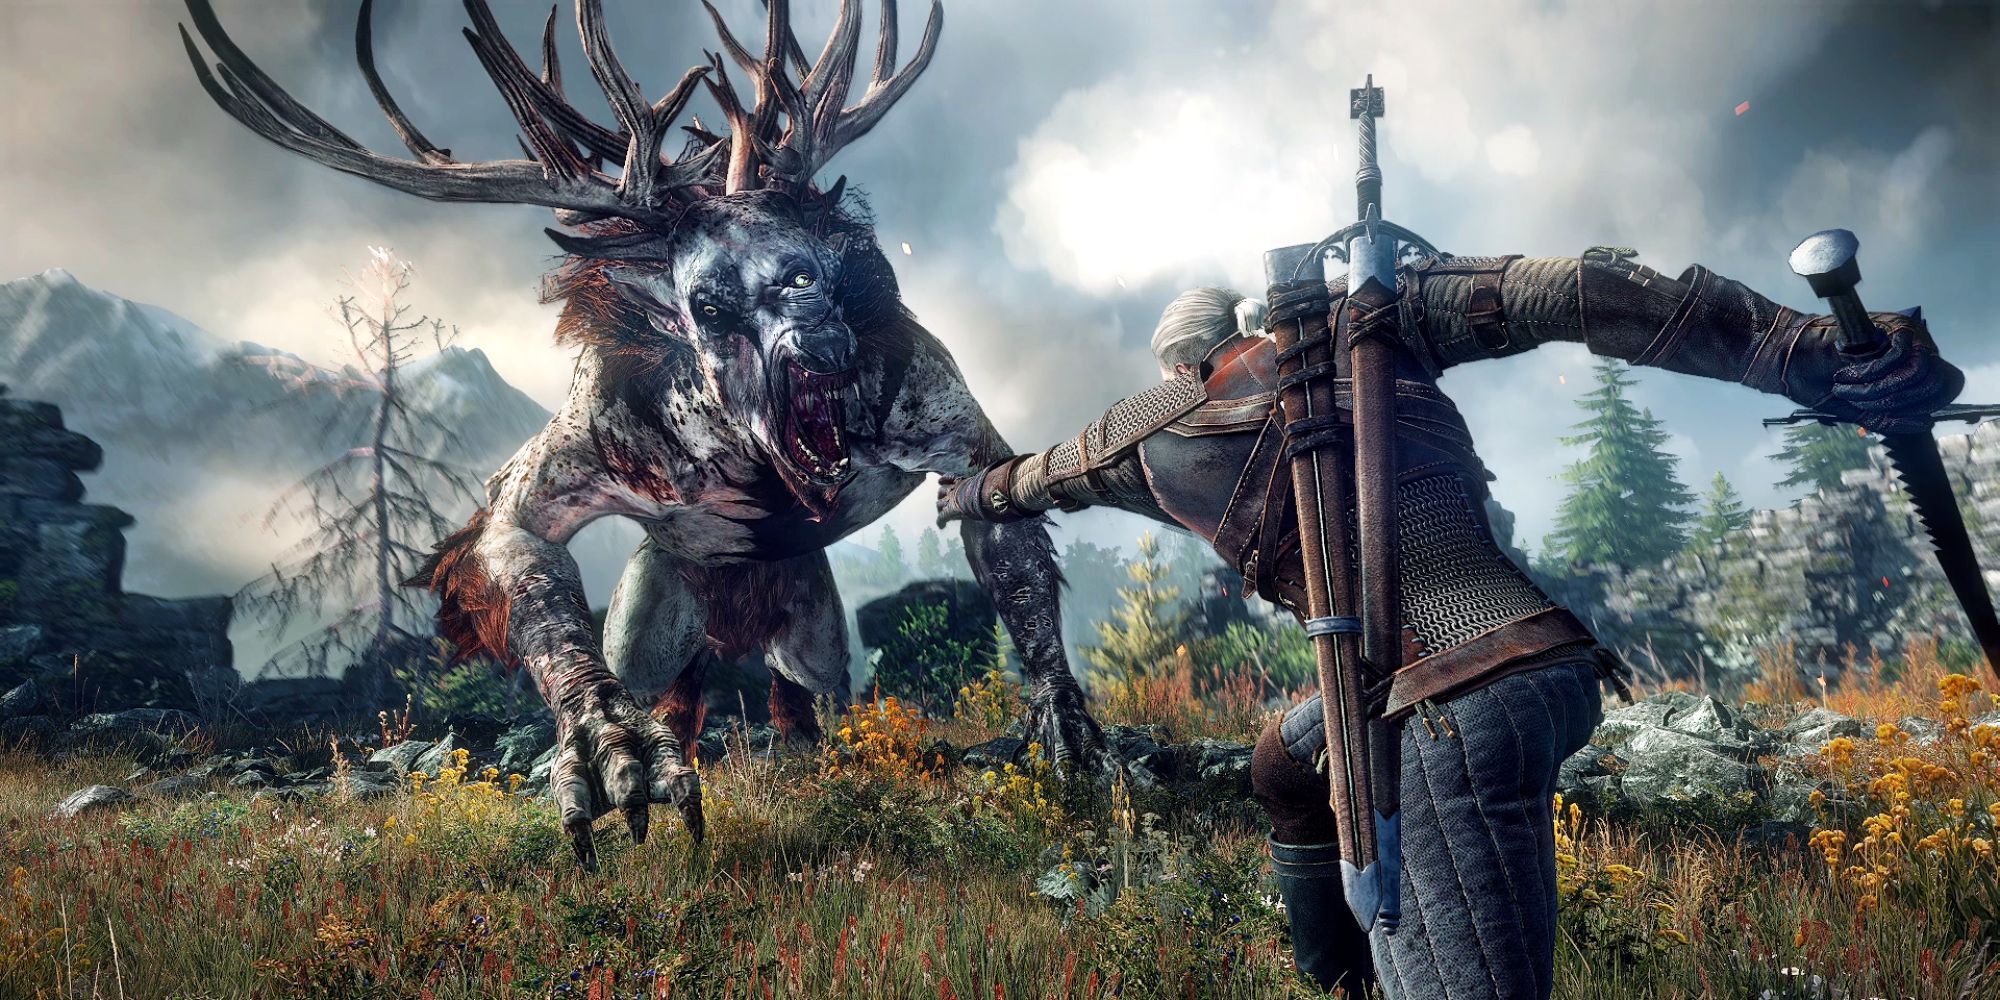 image from The Witcher 3 showing Geralt fighting a monster